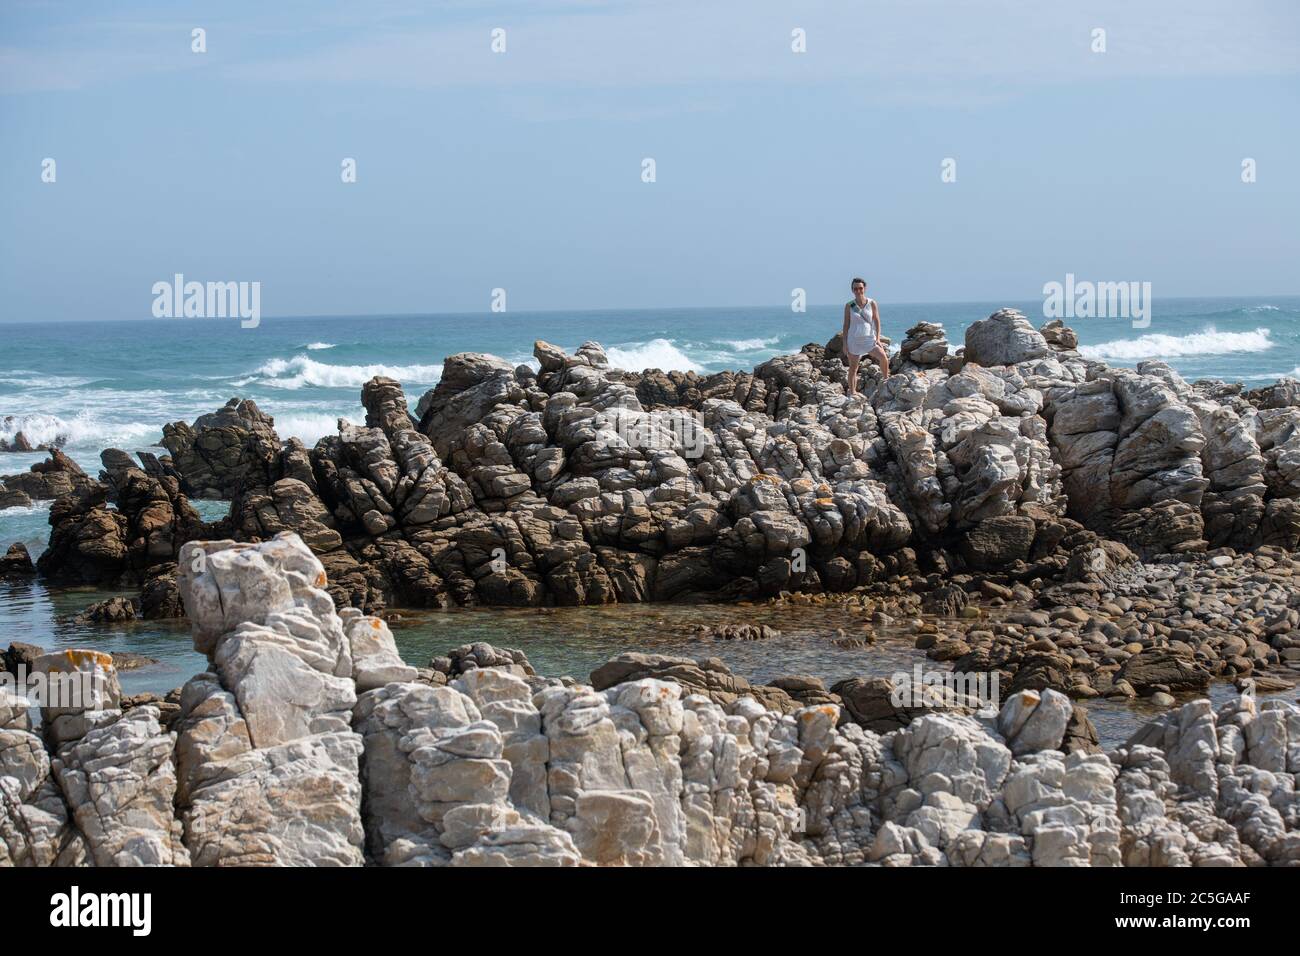 Cape Agulhas, the geographic southern tip of the African continent and the beginning of the dividing line between the Atlantic and Indian Oceans, Sout Stock Photo